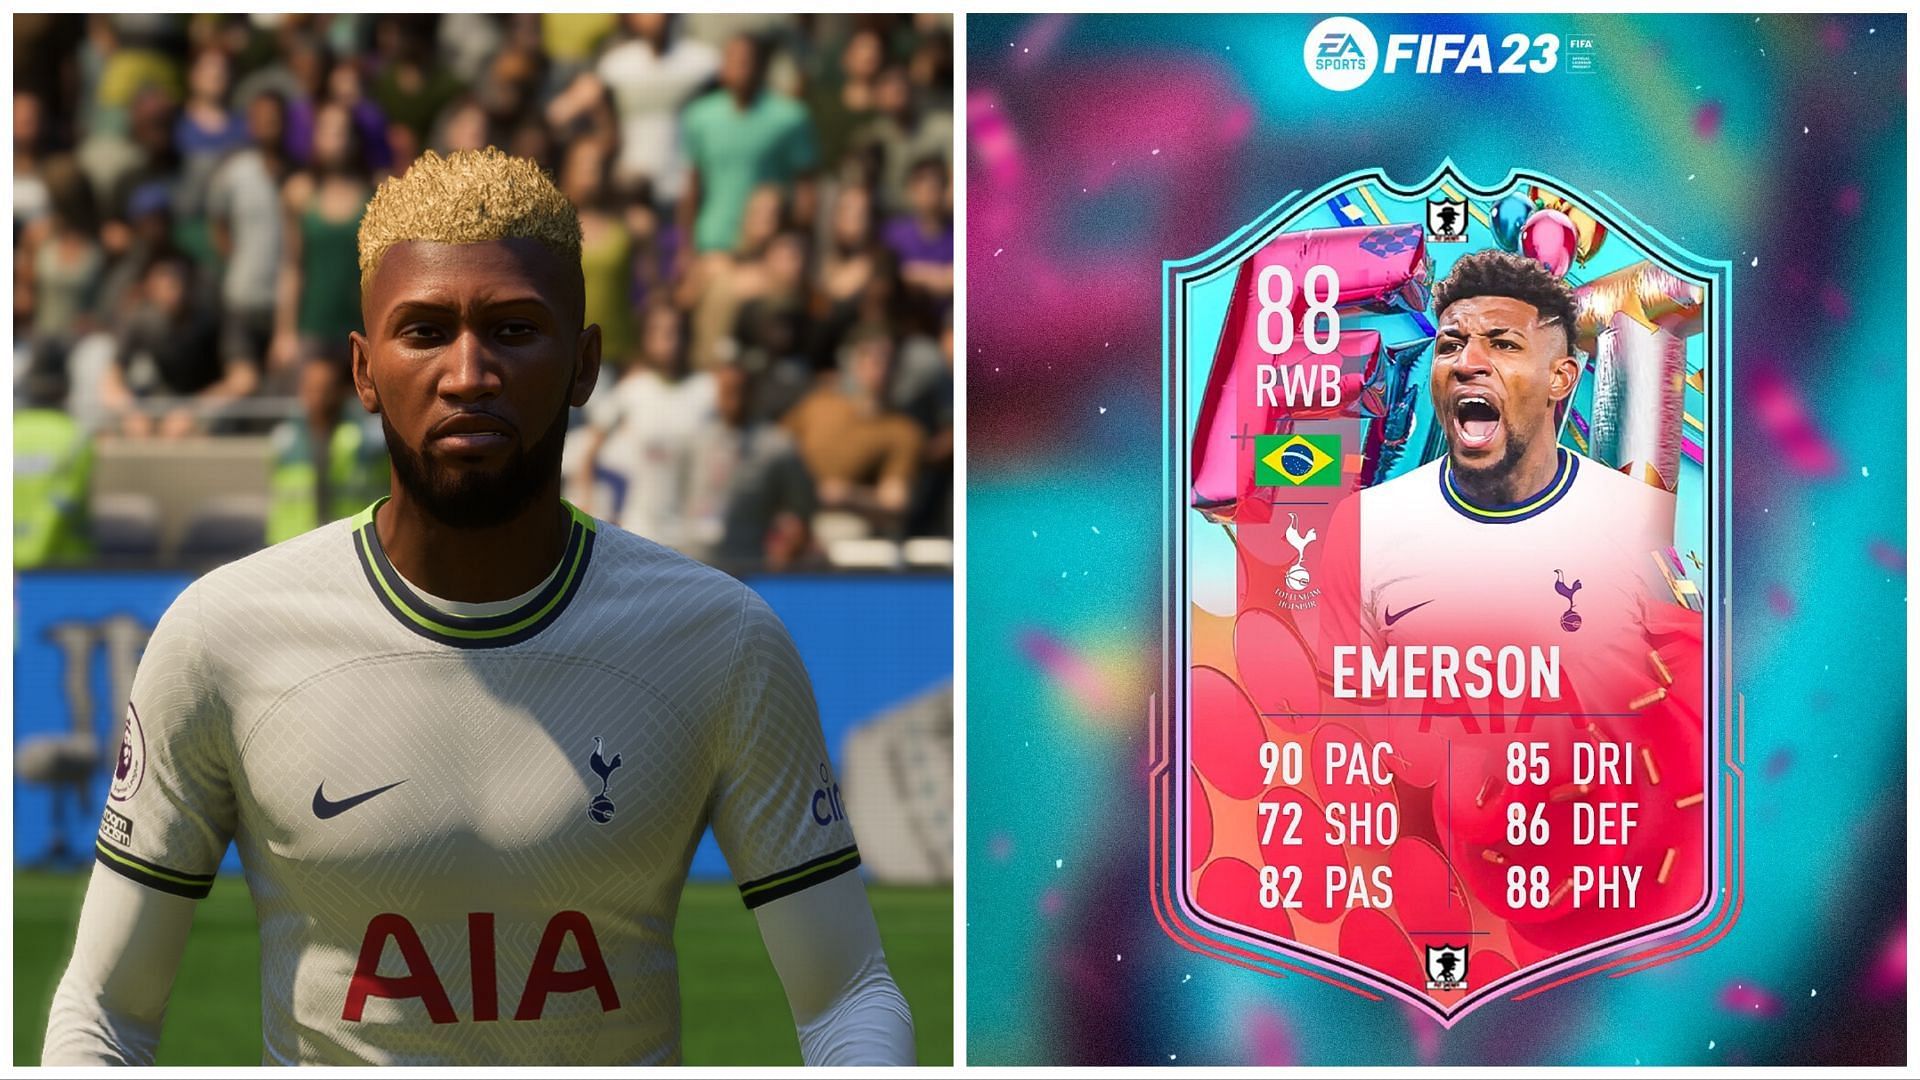 FUT Birthday Emerson has been leaked (Images via EA Sports and Twitter/FUT Birthday)